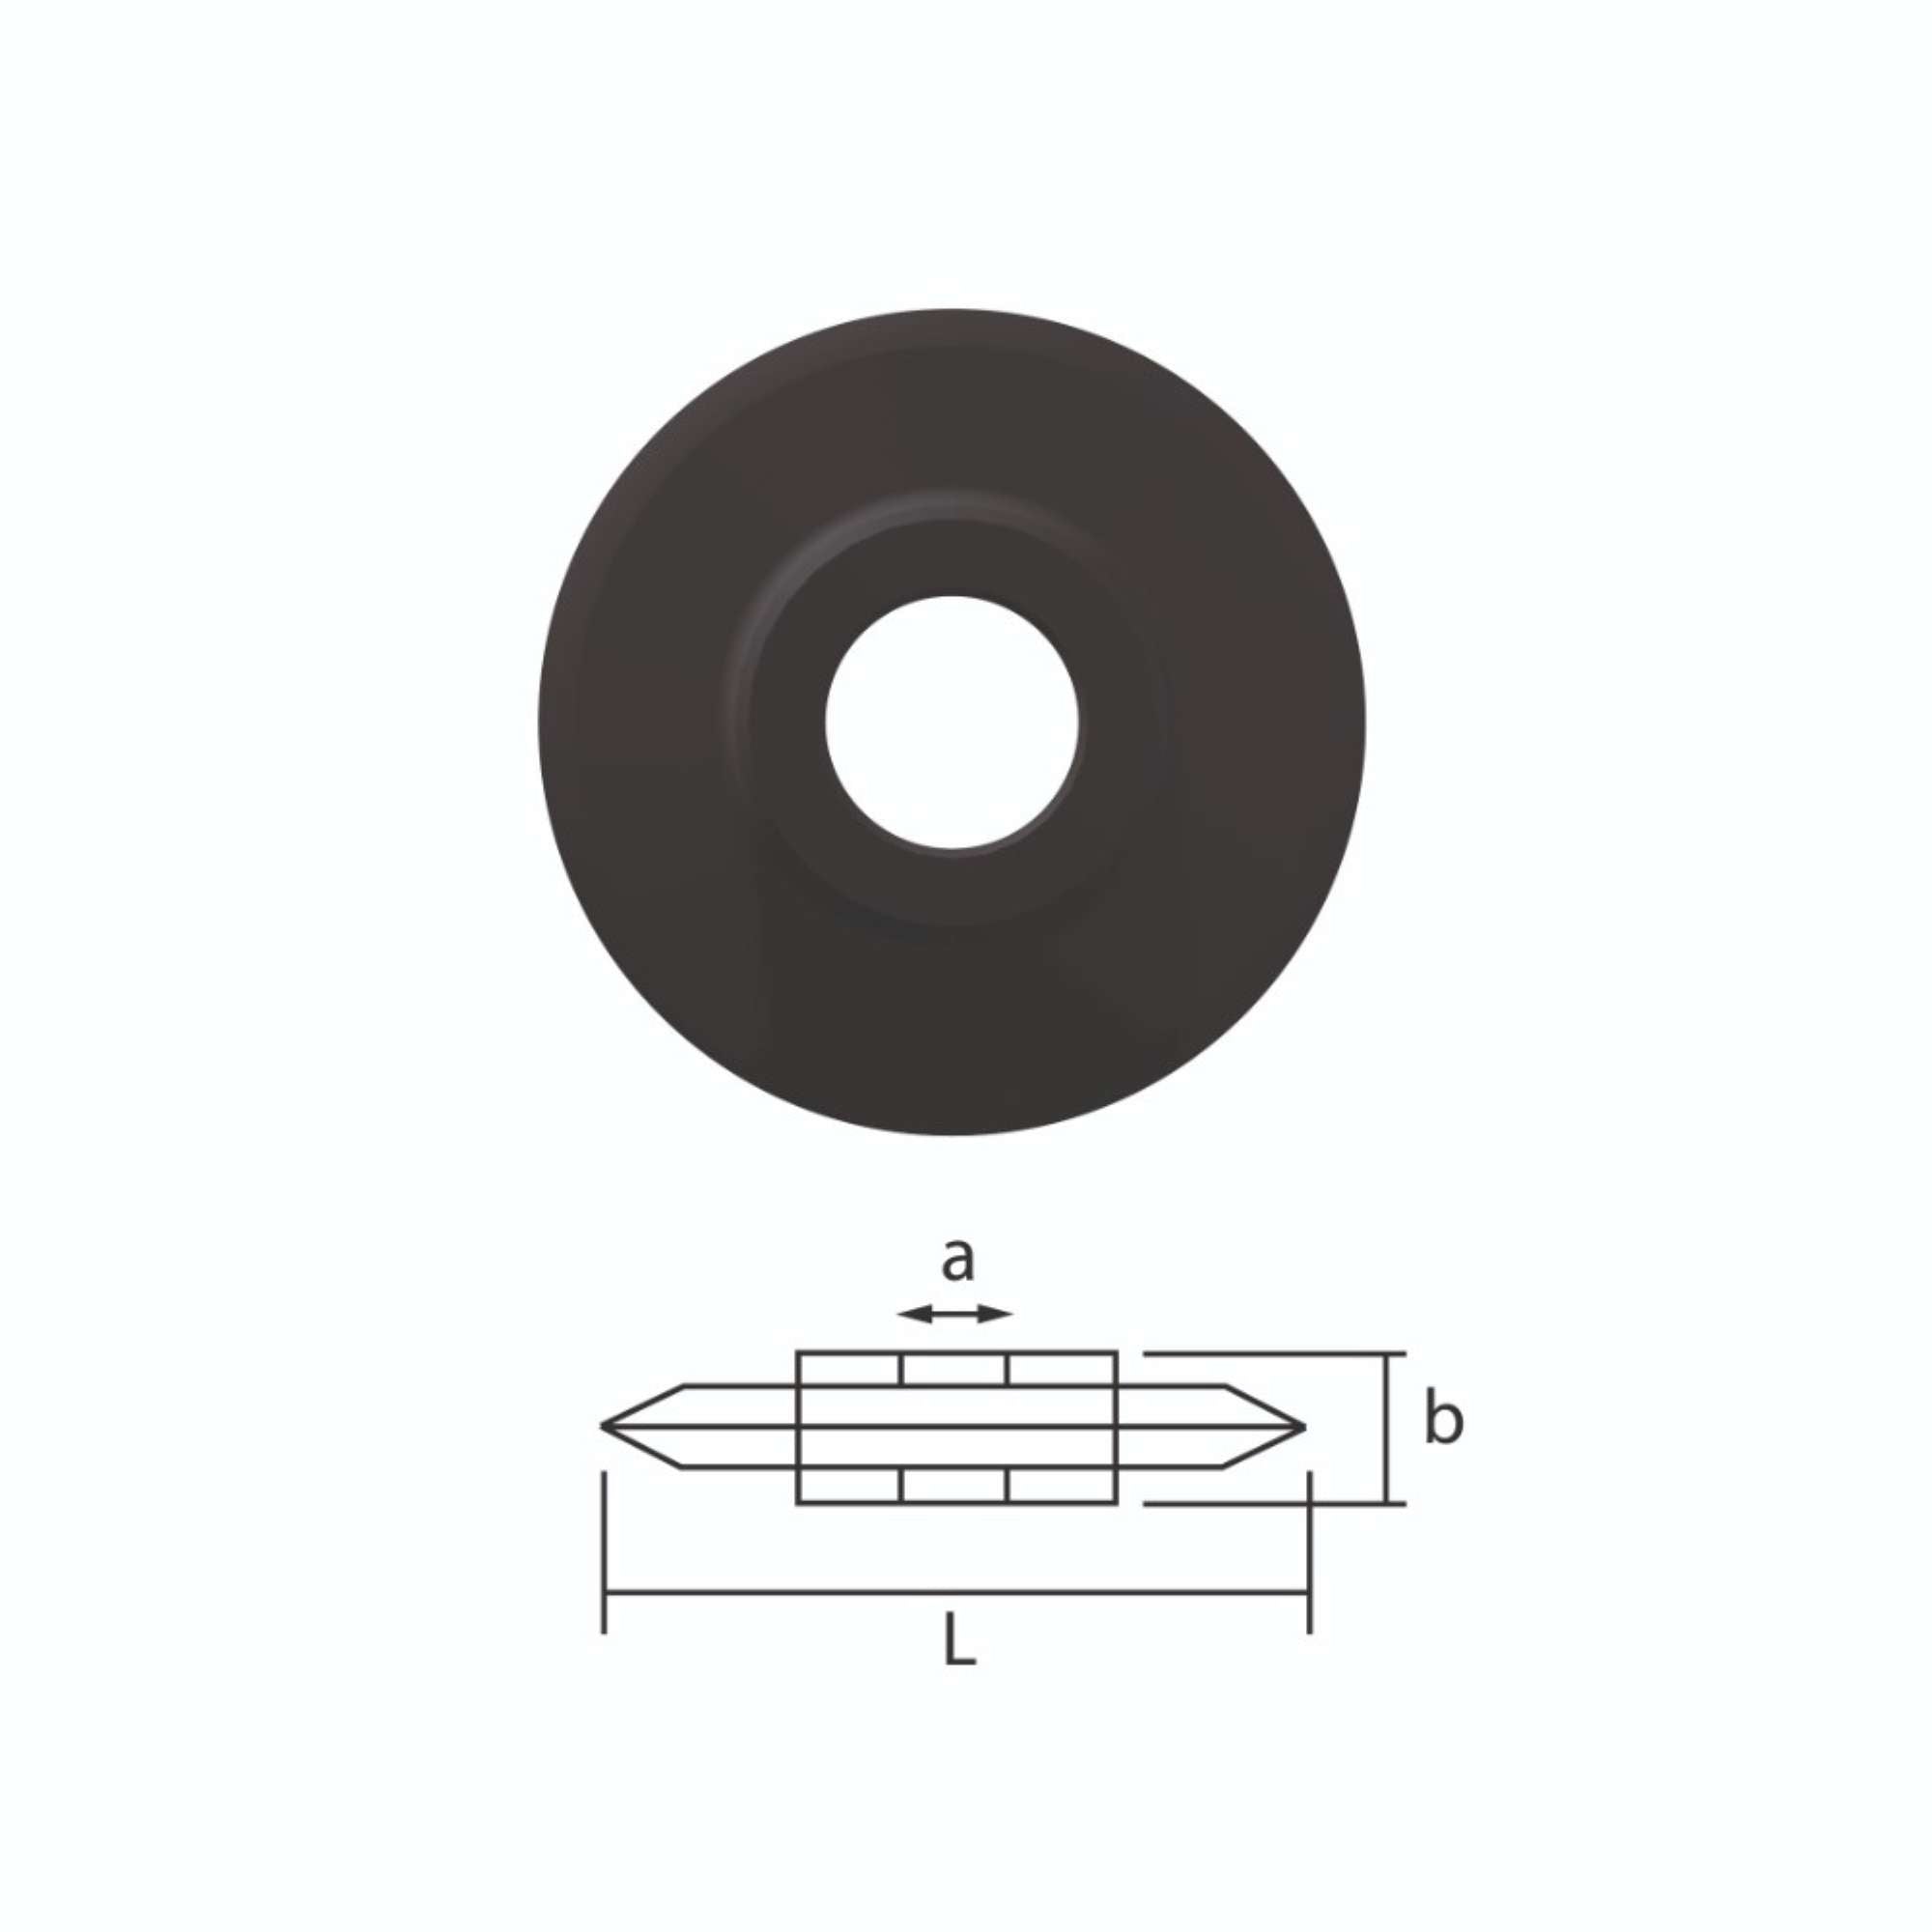 Replacement wheel for 313 A pipe cutter - Usag 313 AR U03130003Q